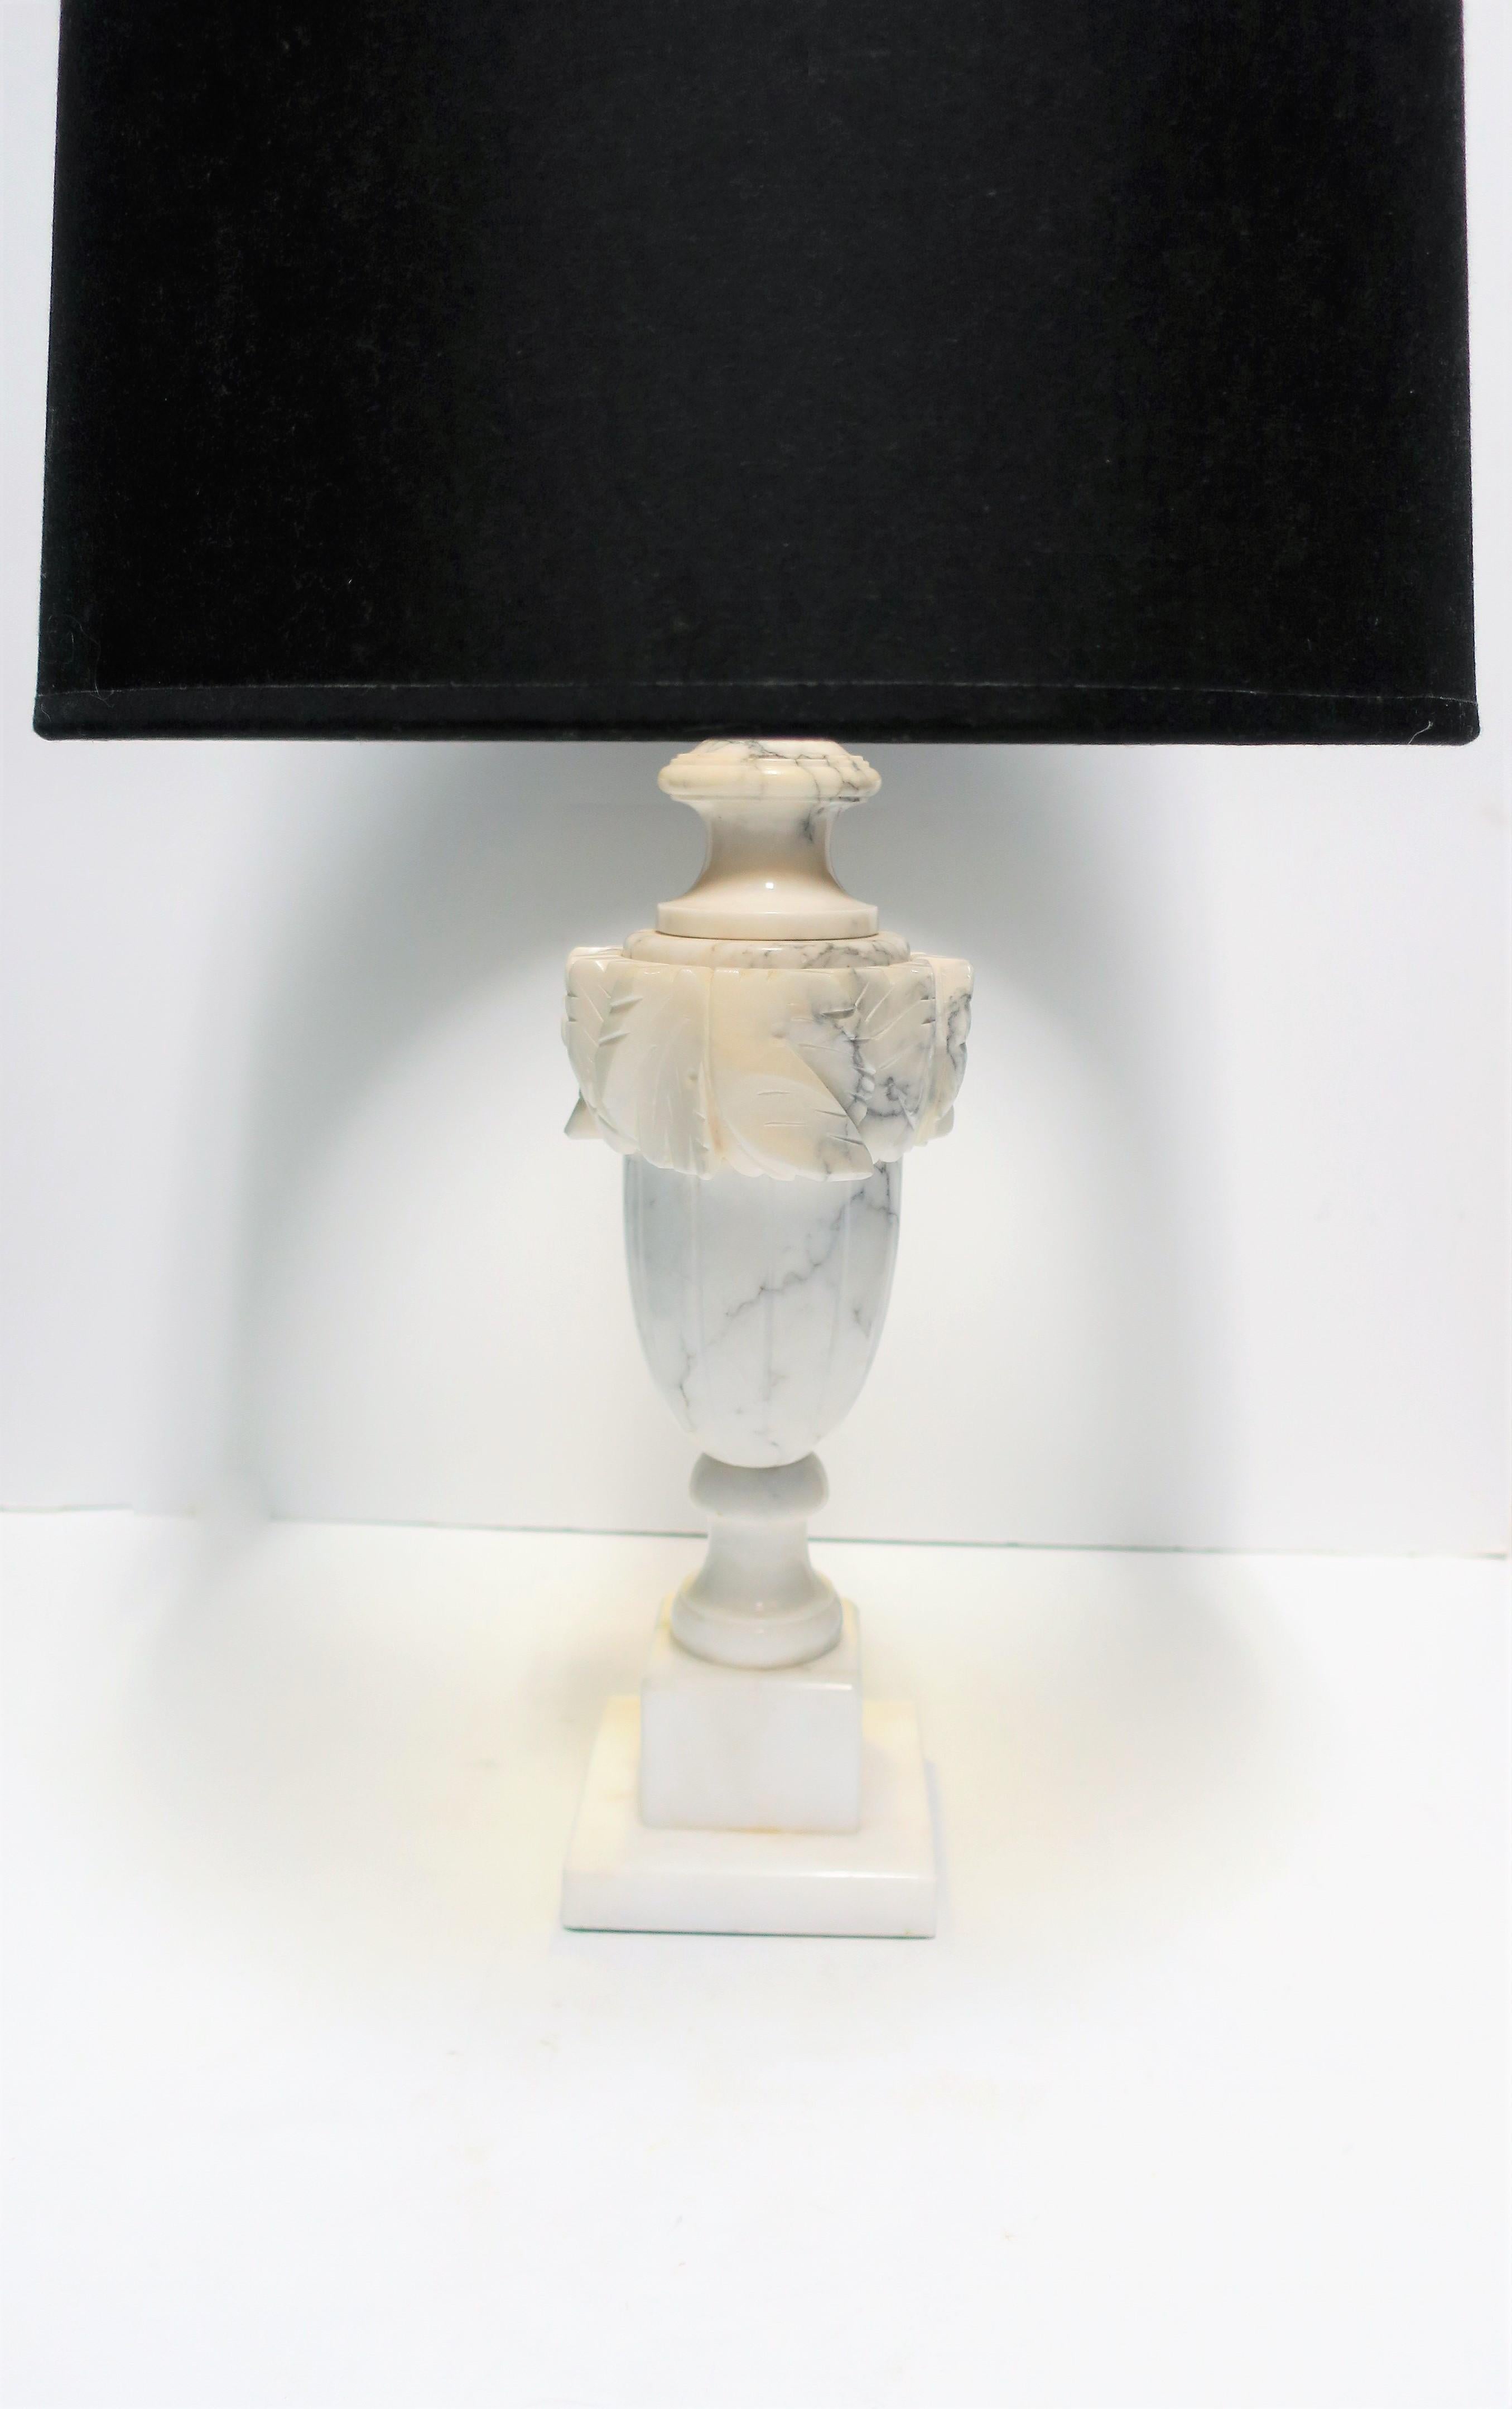 20th Century Italian Neoclassical Solid Black and White Marble Urn Table Lamp